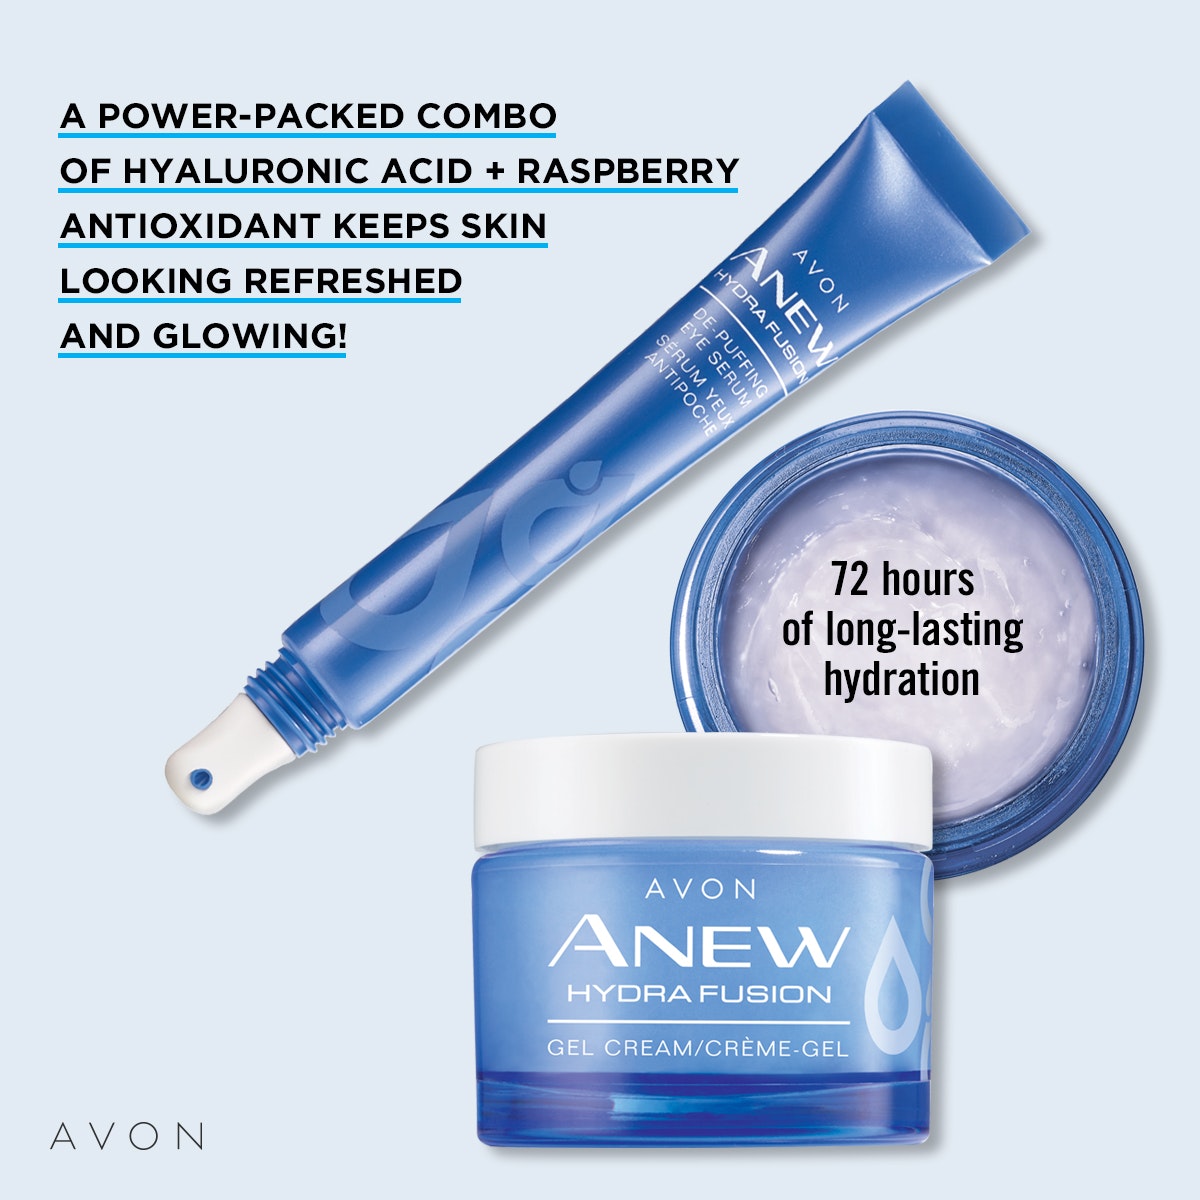 Avon Anew Hydra Fusion line of product.  Purchase 2, get the Eye Serum Free: https://www.avon.com/promotions/20505?rep=mybeauty